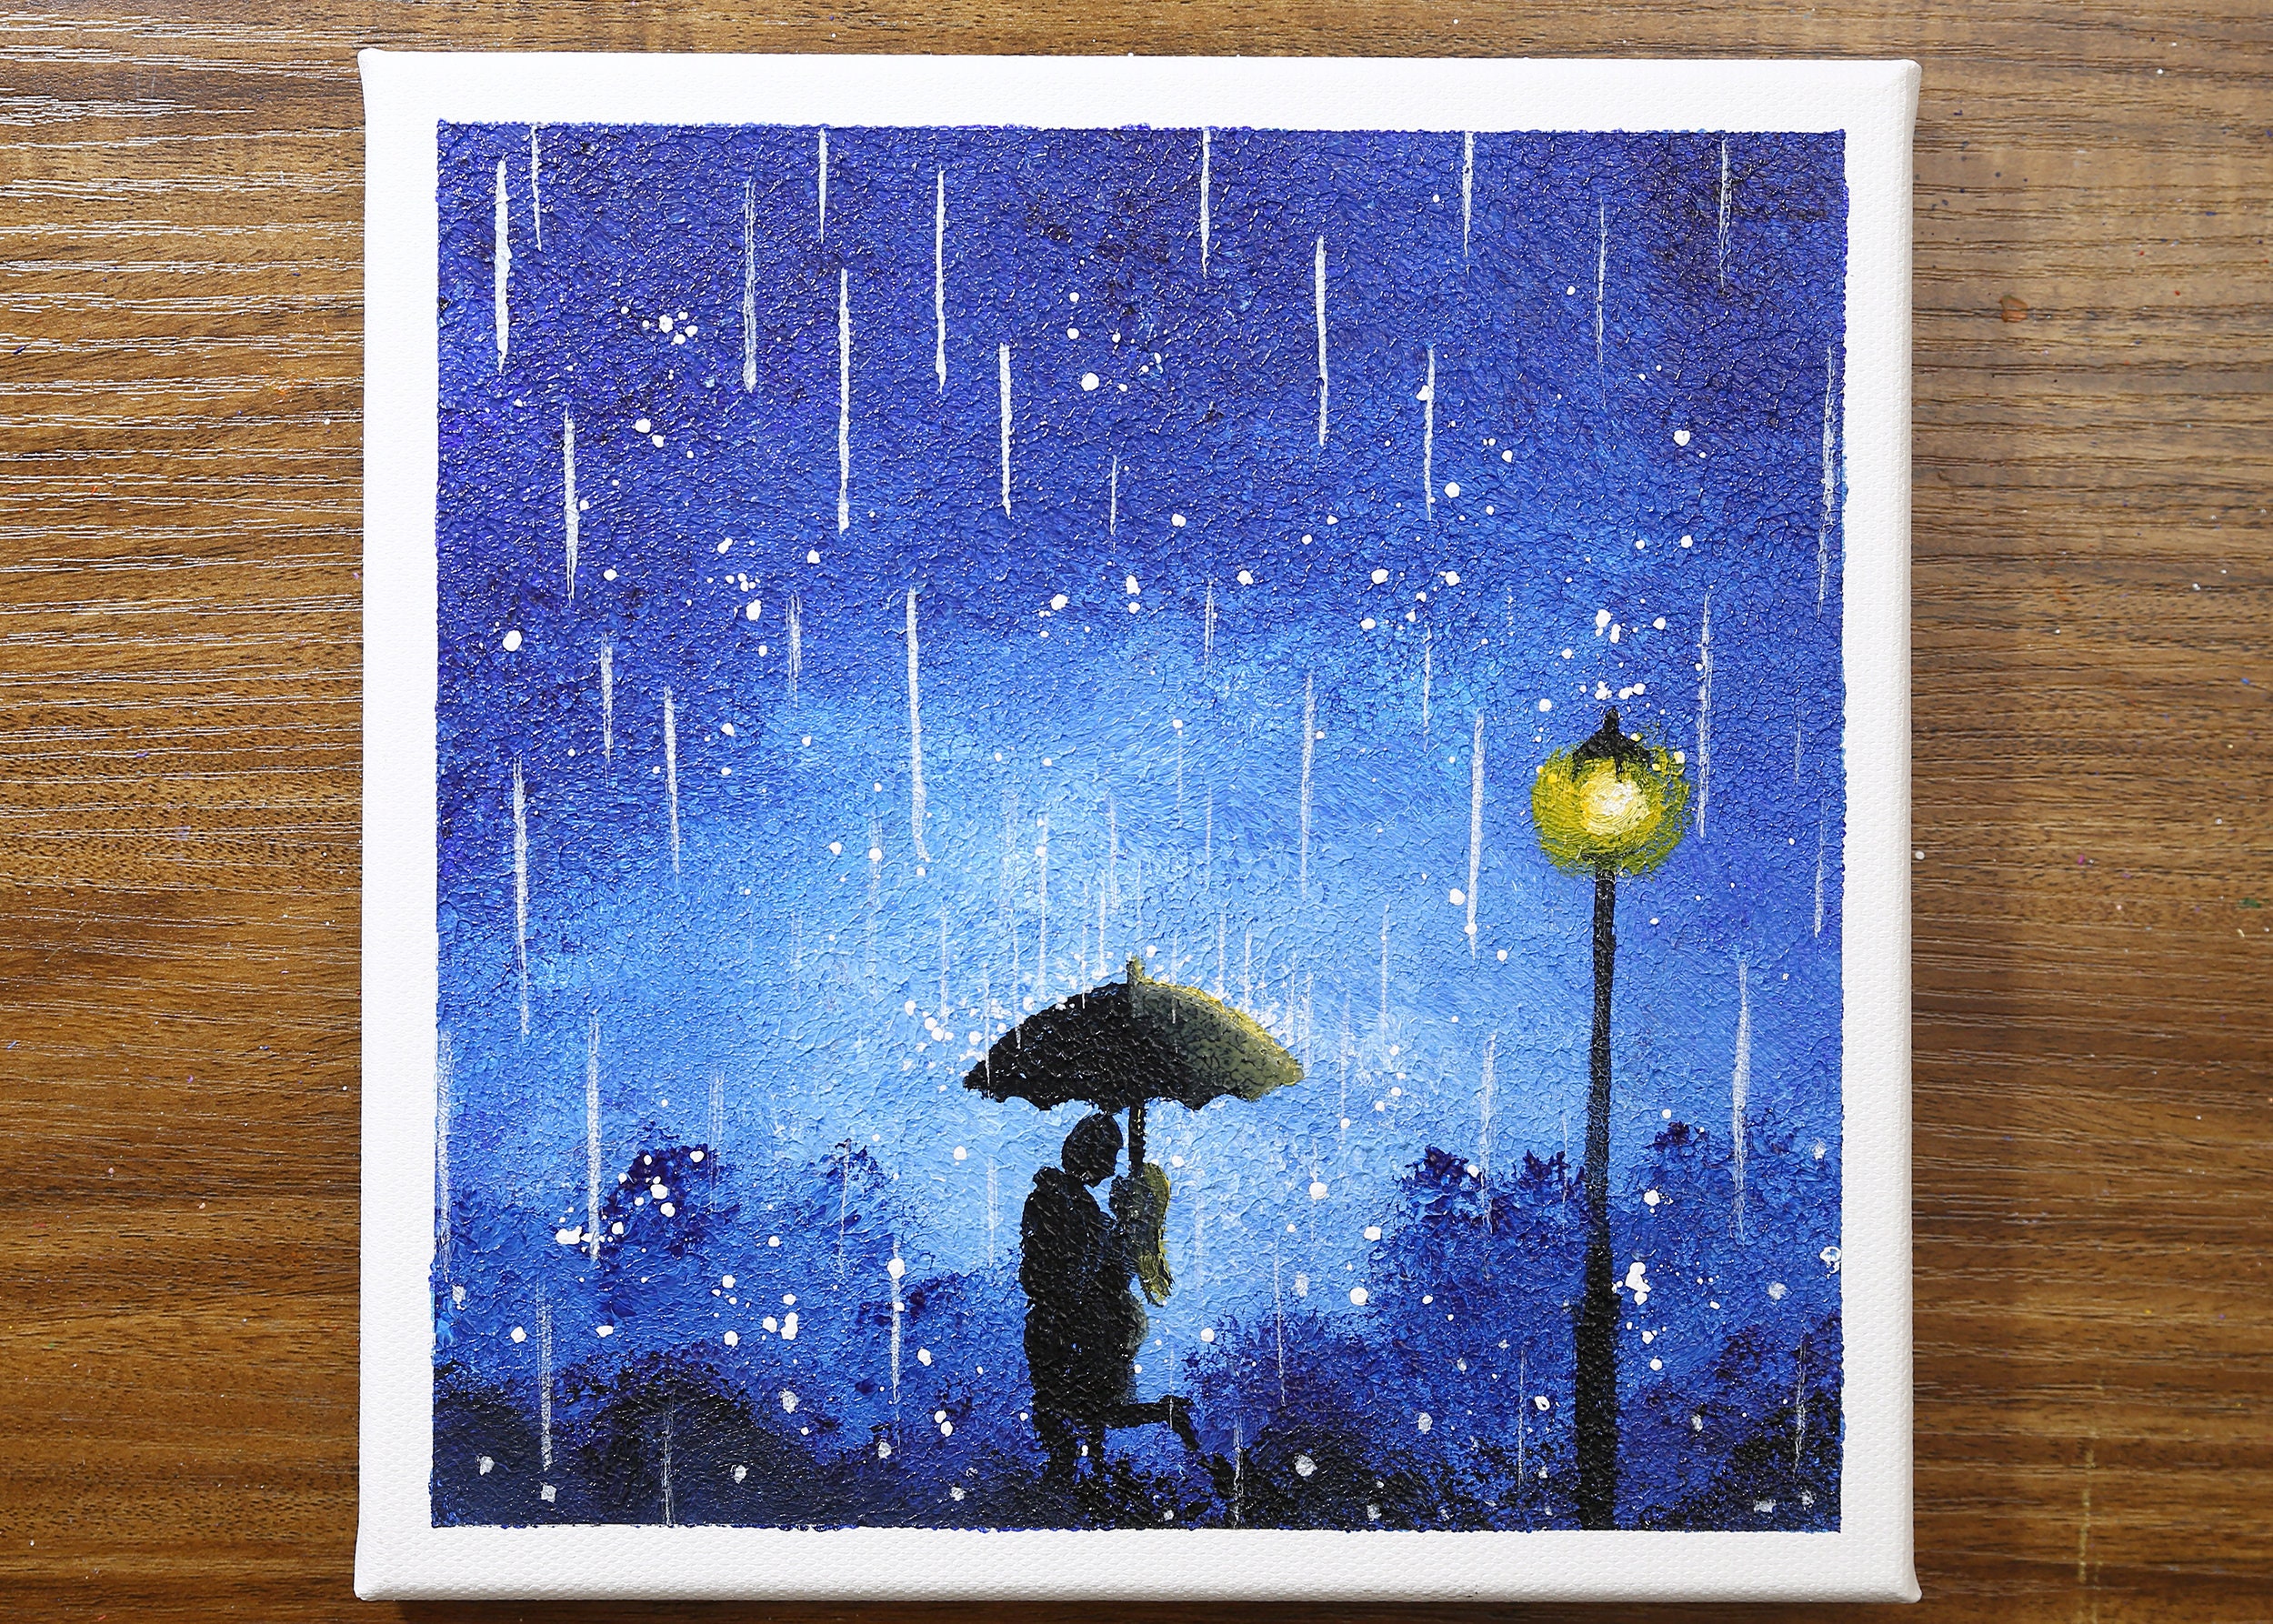 Rainy Day Painting / Acrylic Painting for Beginners 